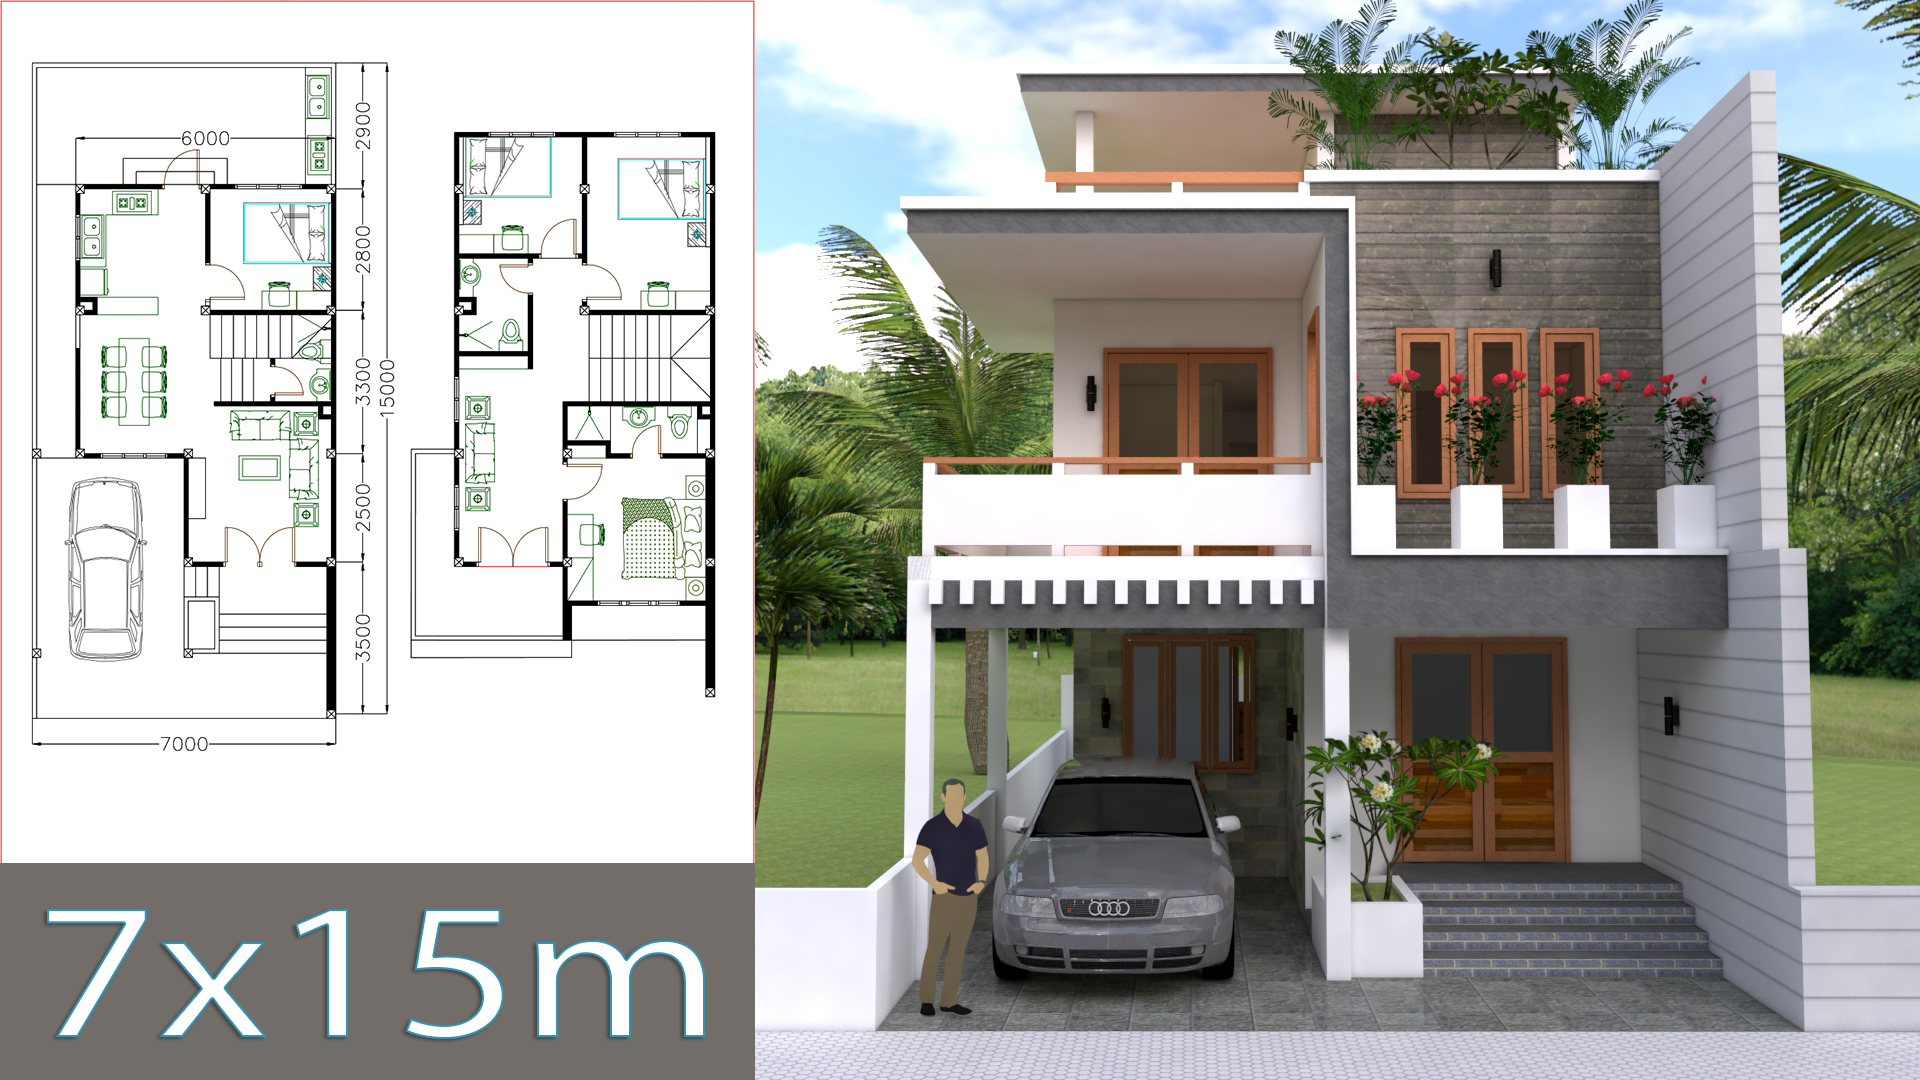 Home Design Plan 7x15m with 4 Bedrooms